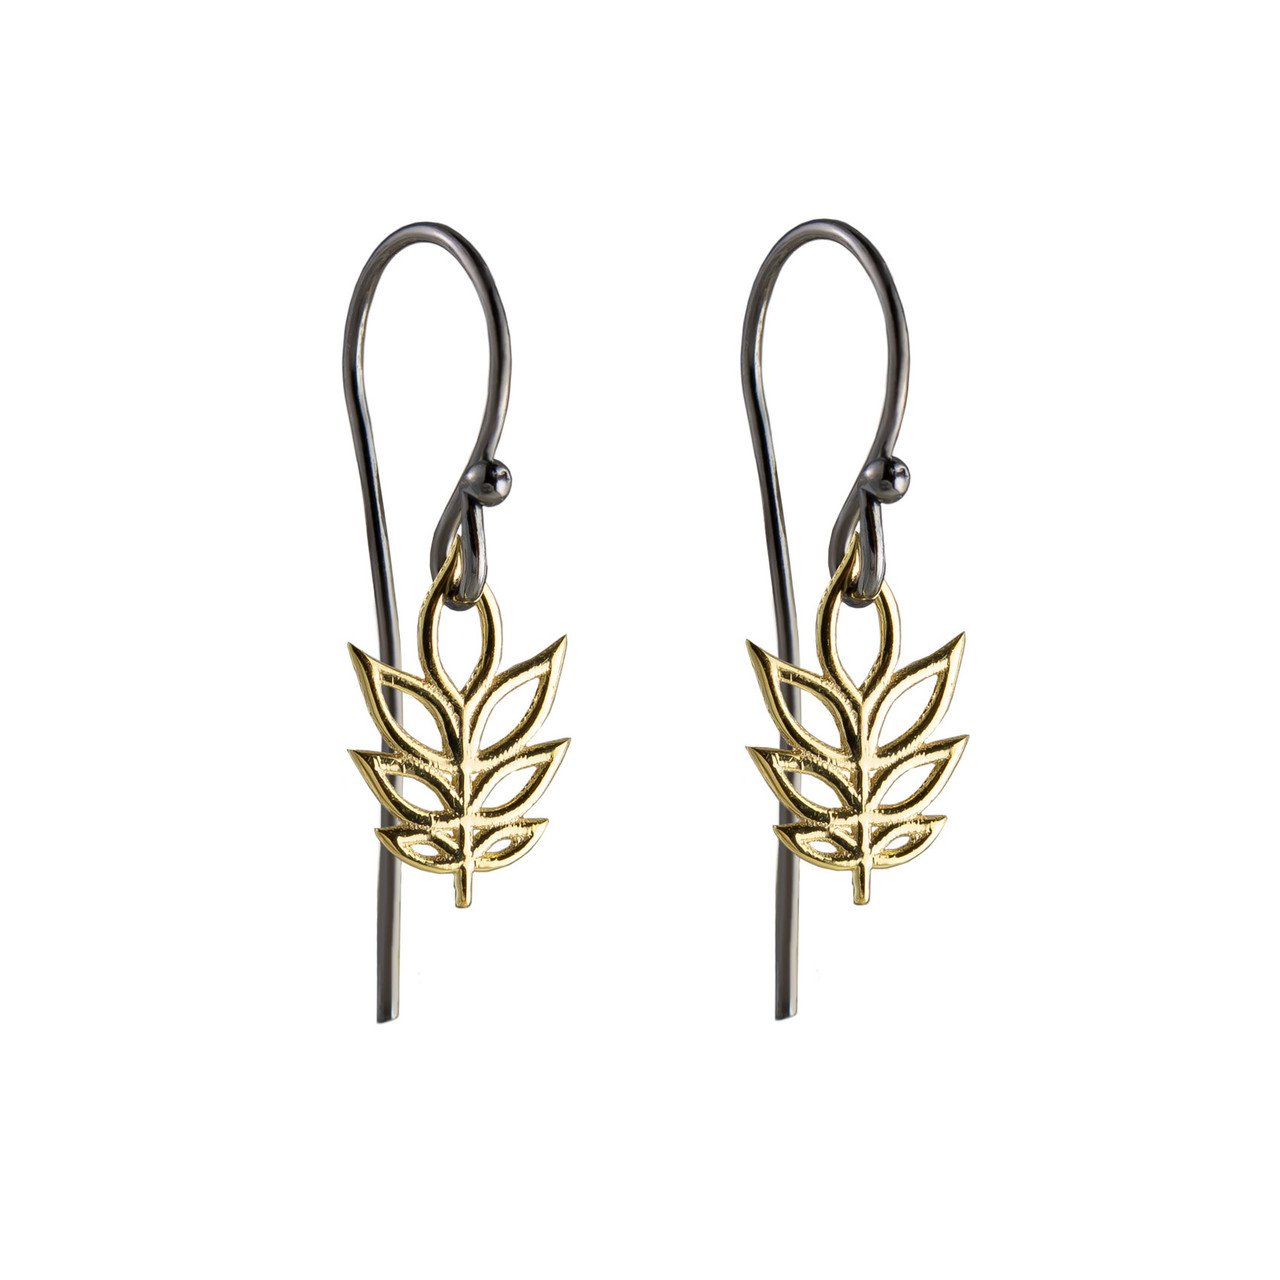 Atelier Errikos, Rhodium Plated Silver and 14ct Gold Tall Leaf Hook Earrings, Tomfoolery